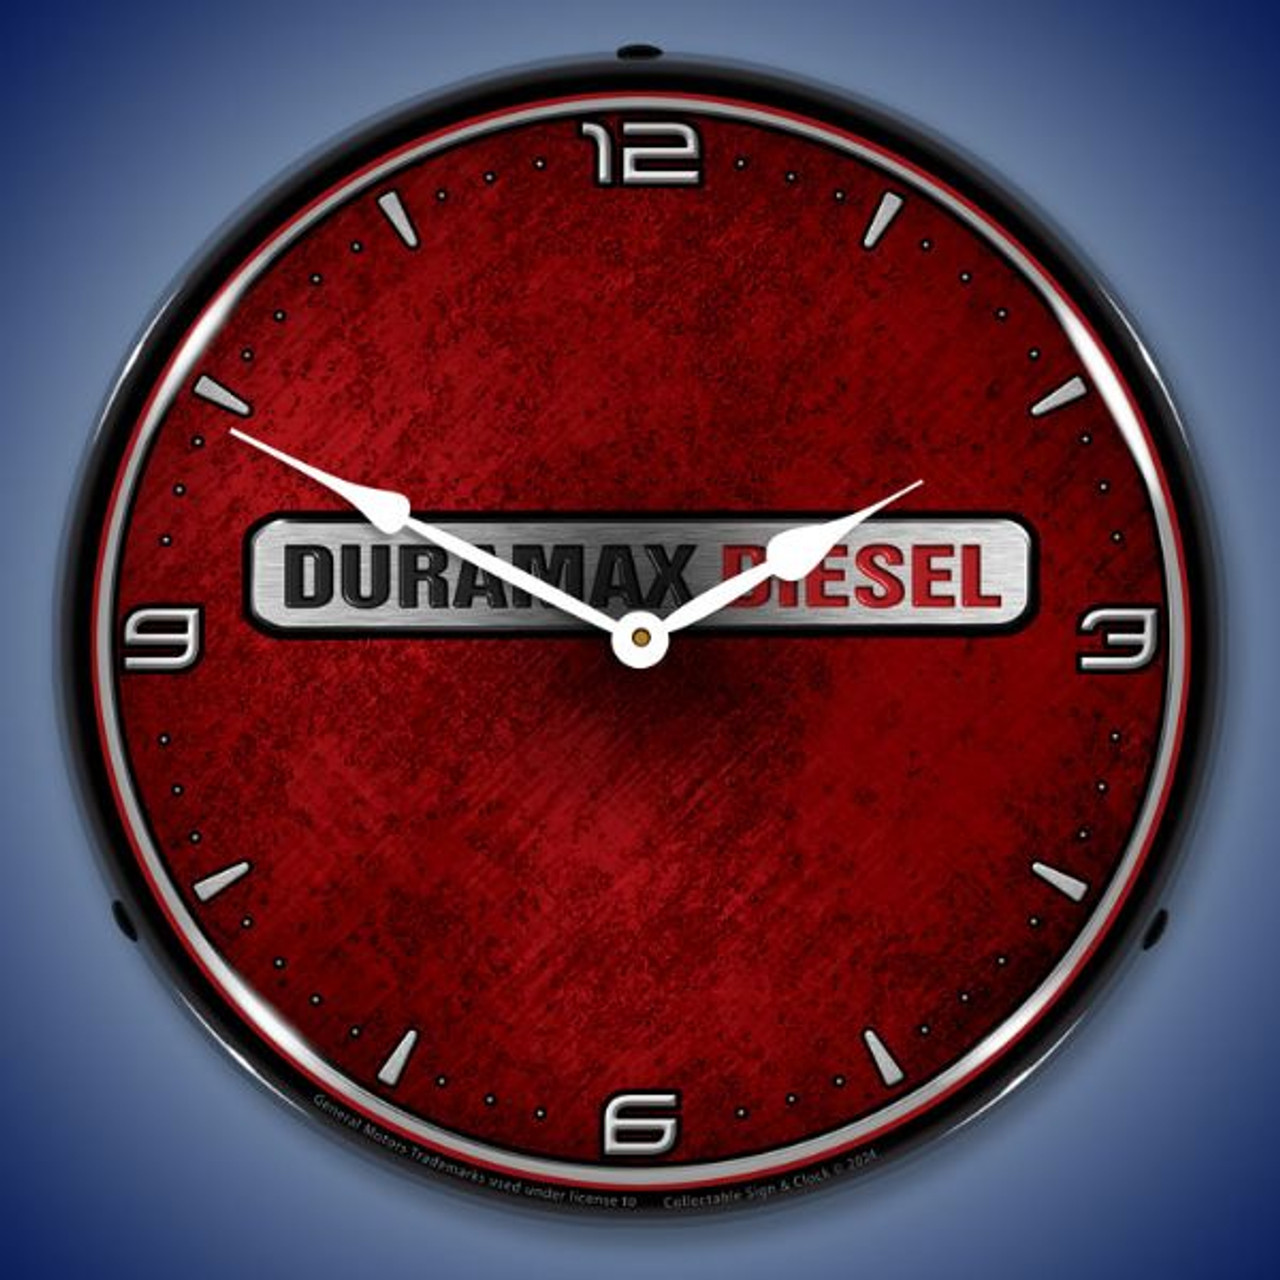 Duramax Diesel LED Lighted Wall Clock 14 x 14 Inches